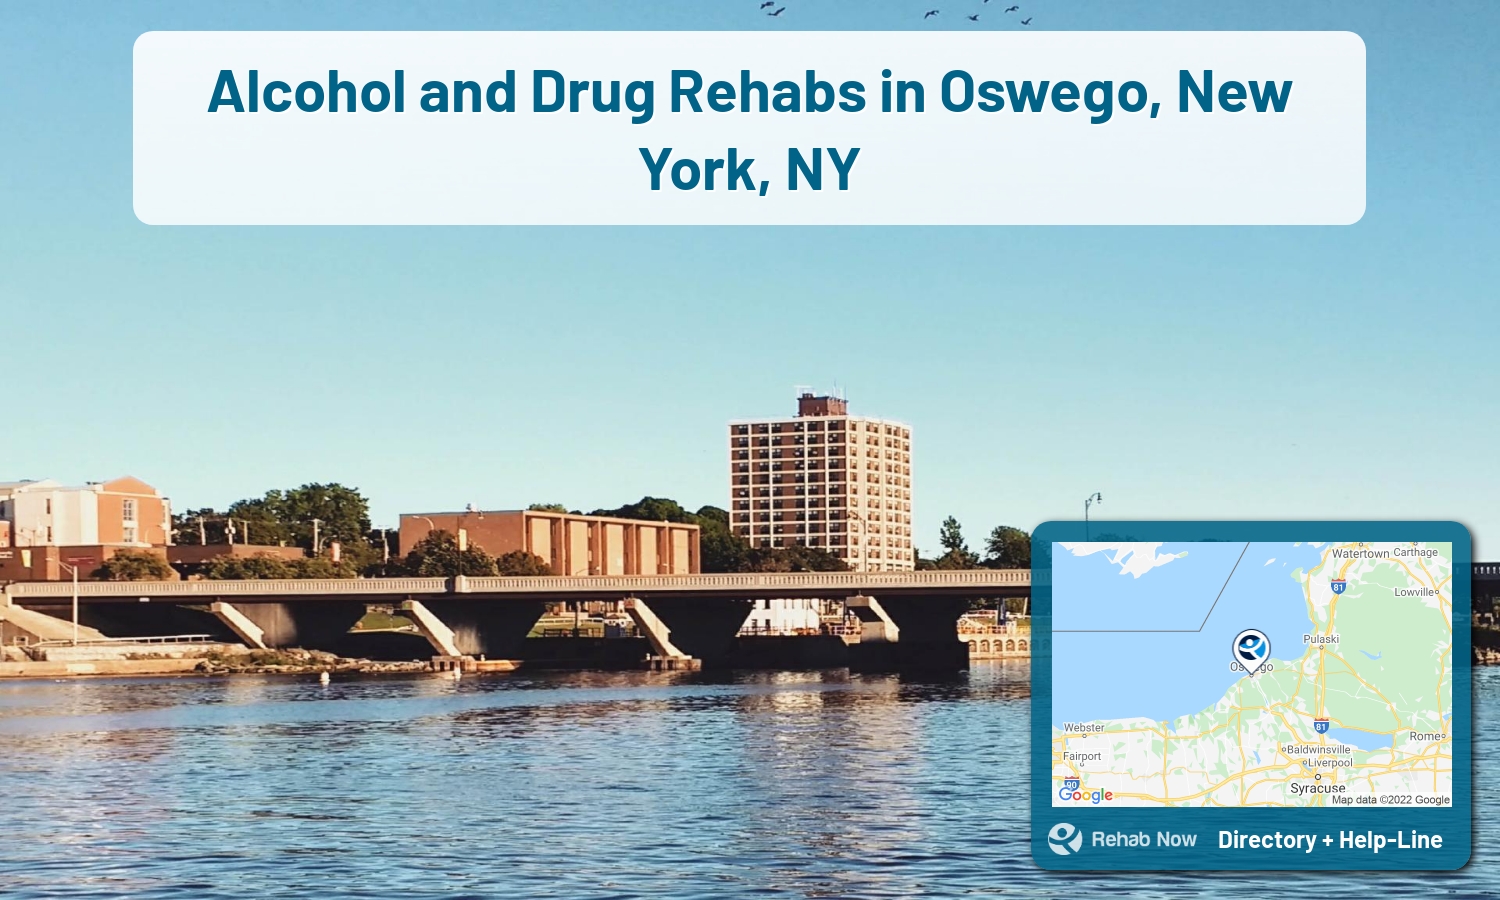 Oswego, NY Treatment Centers. Find drug rehab in Oswego, New York, or detox and treatment programs. Get the right help now!